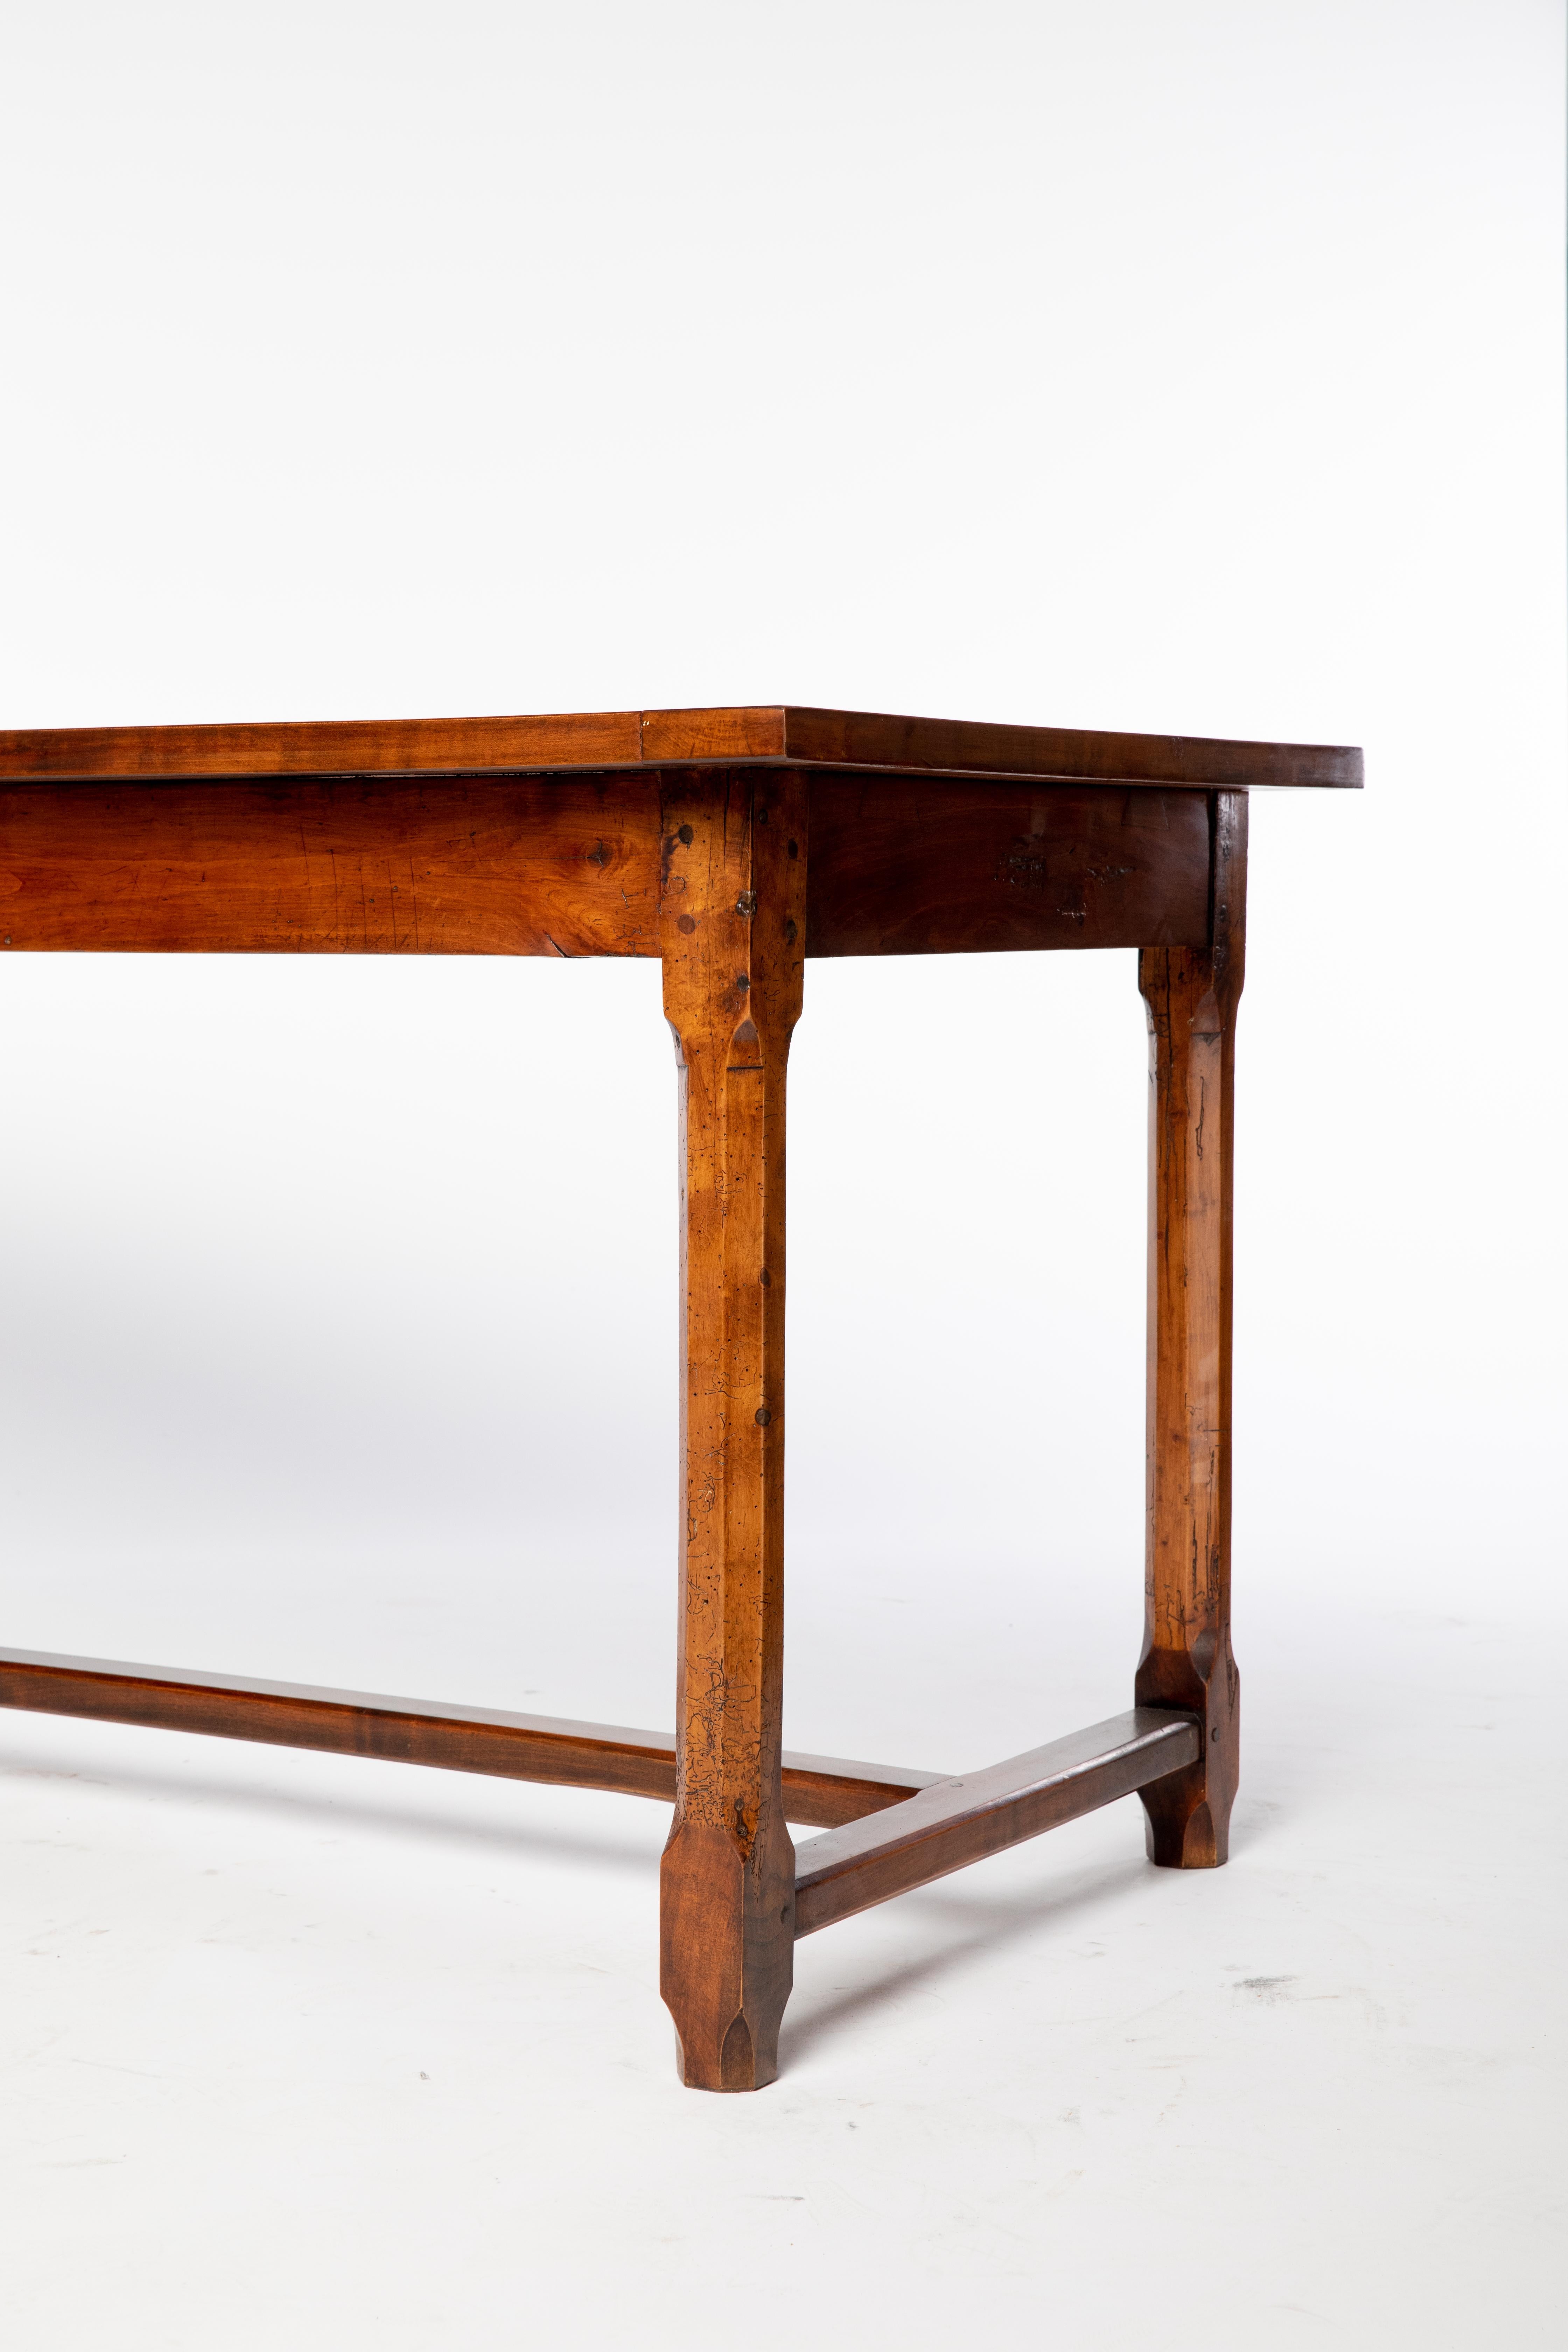 French Provincial Rustic French Fruitwood Farmhouse Table